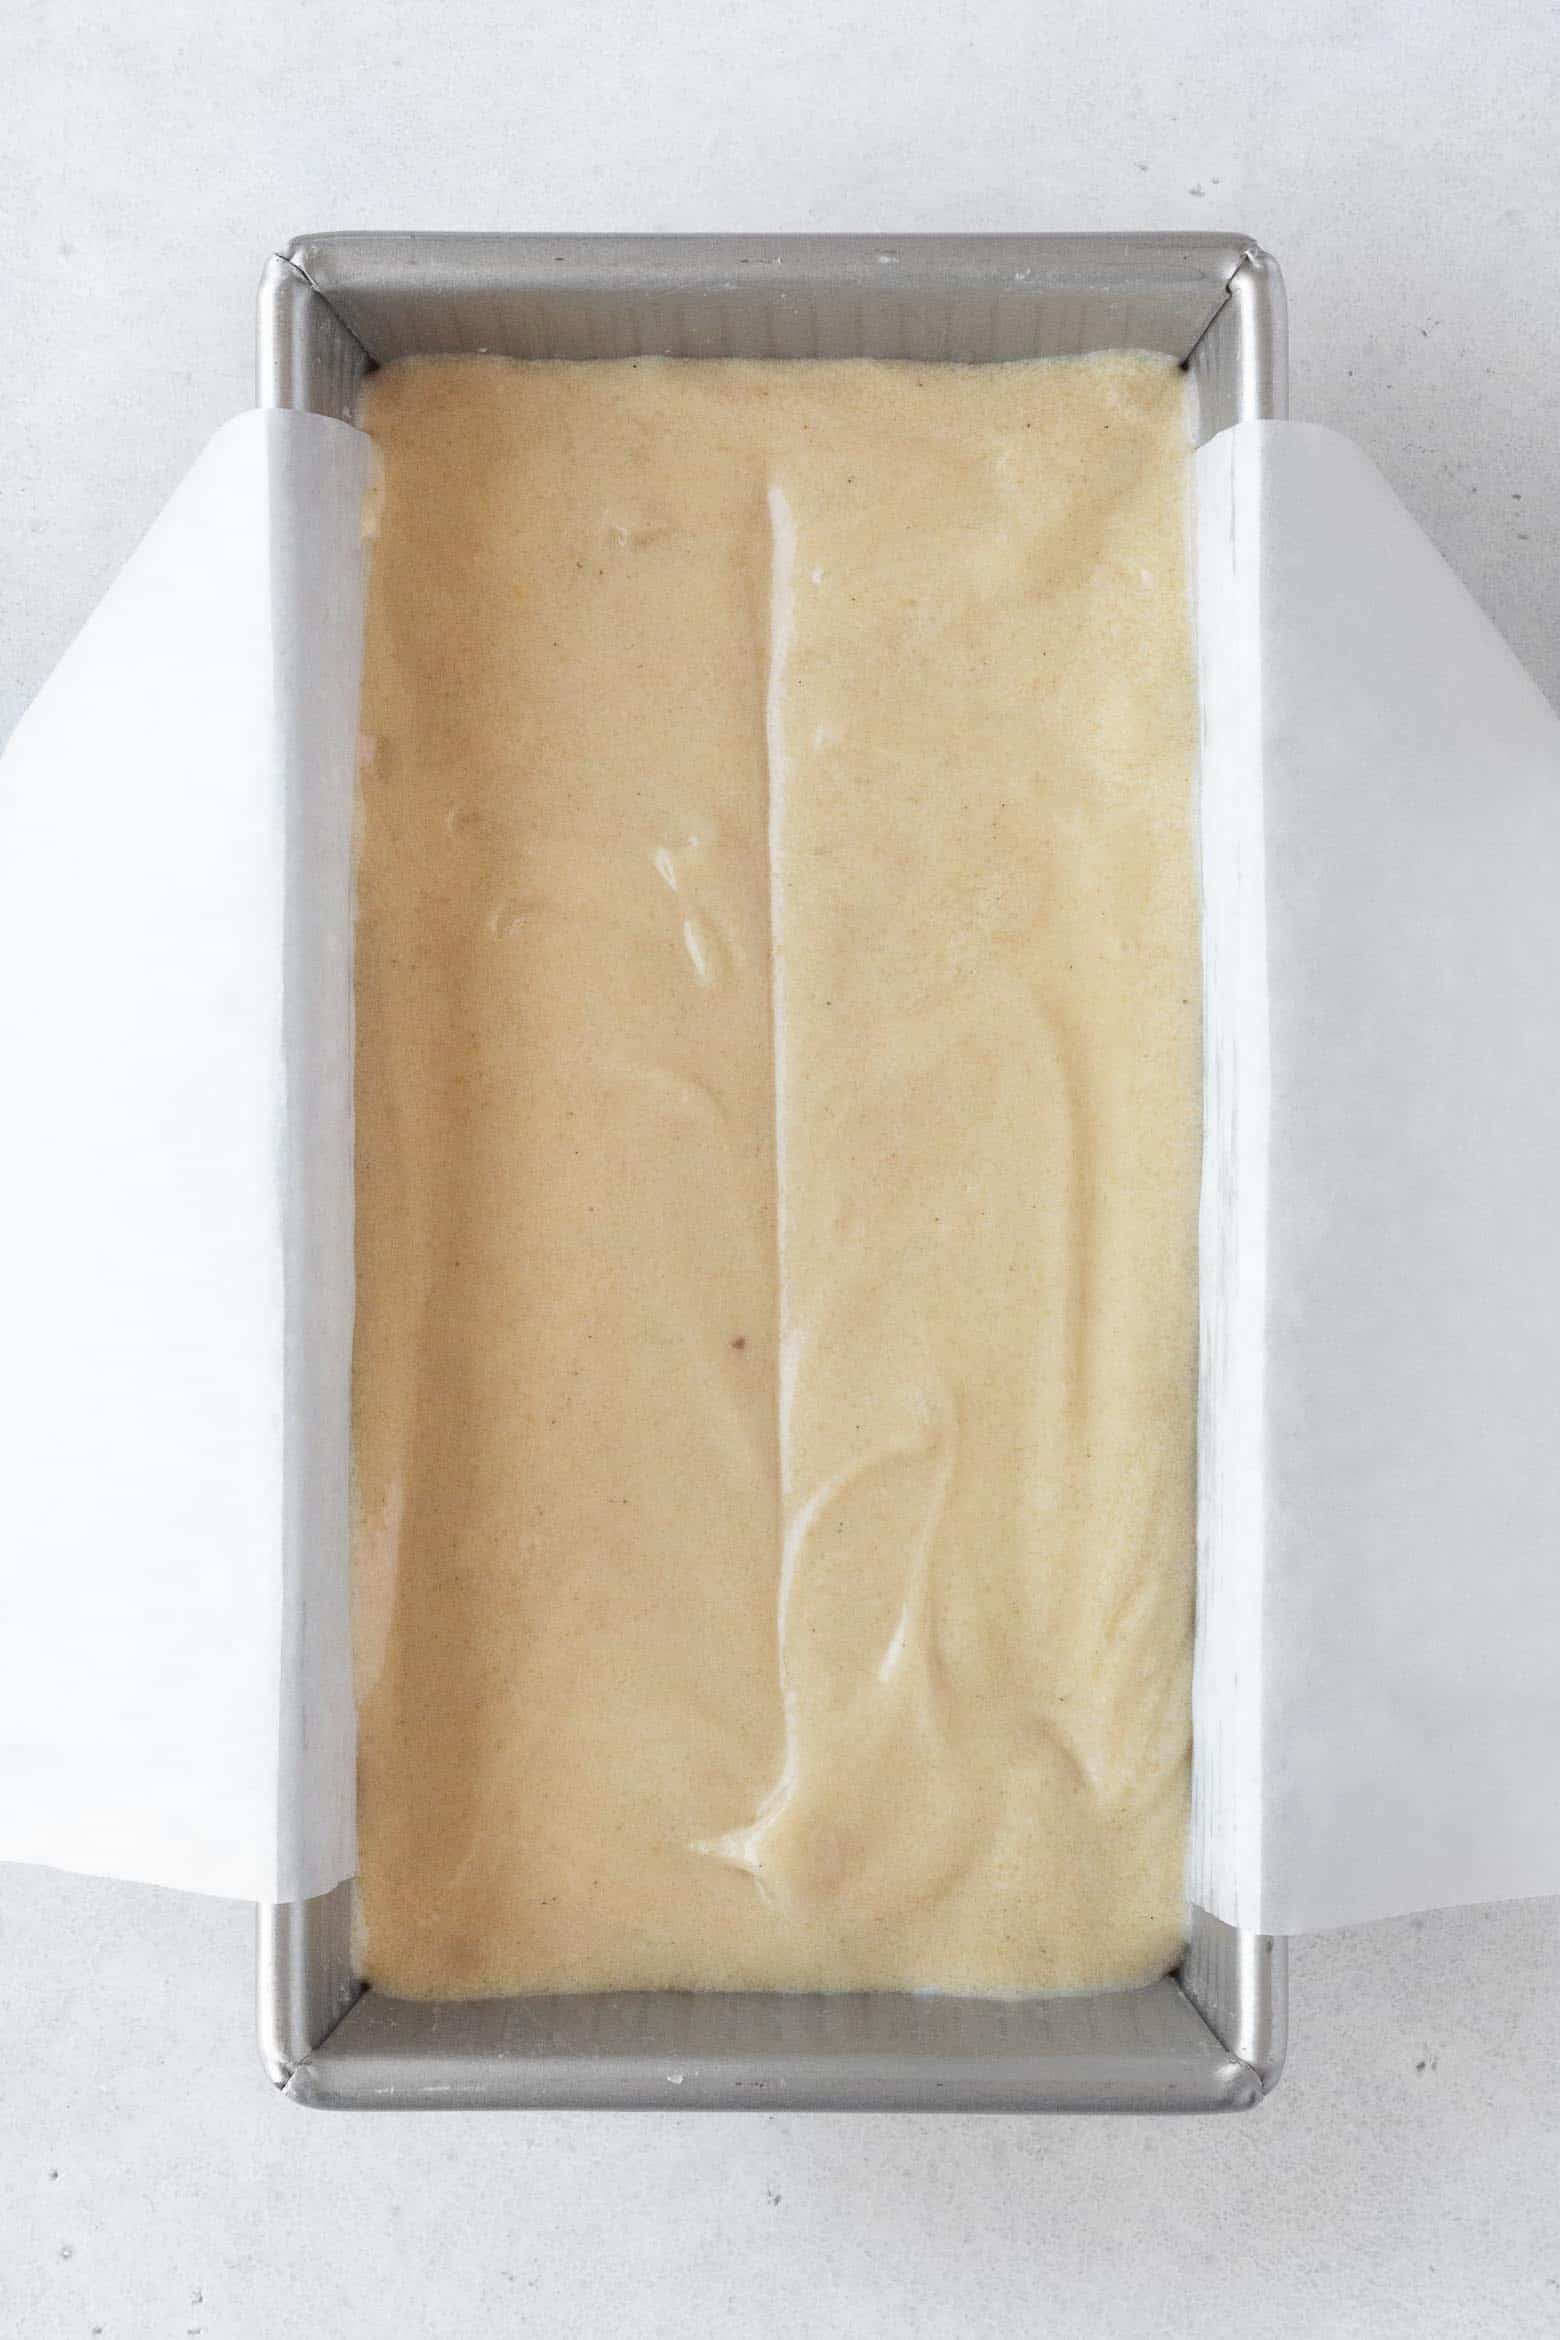 Pour the cake batter in a parchment paper lined loaf pan.